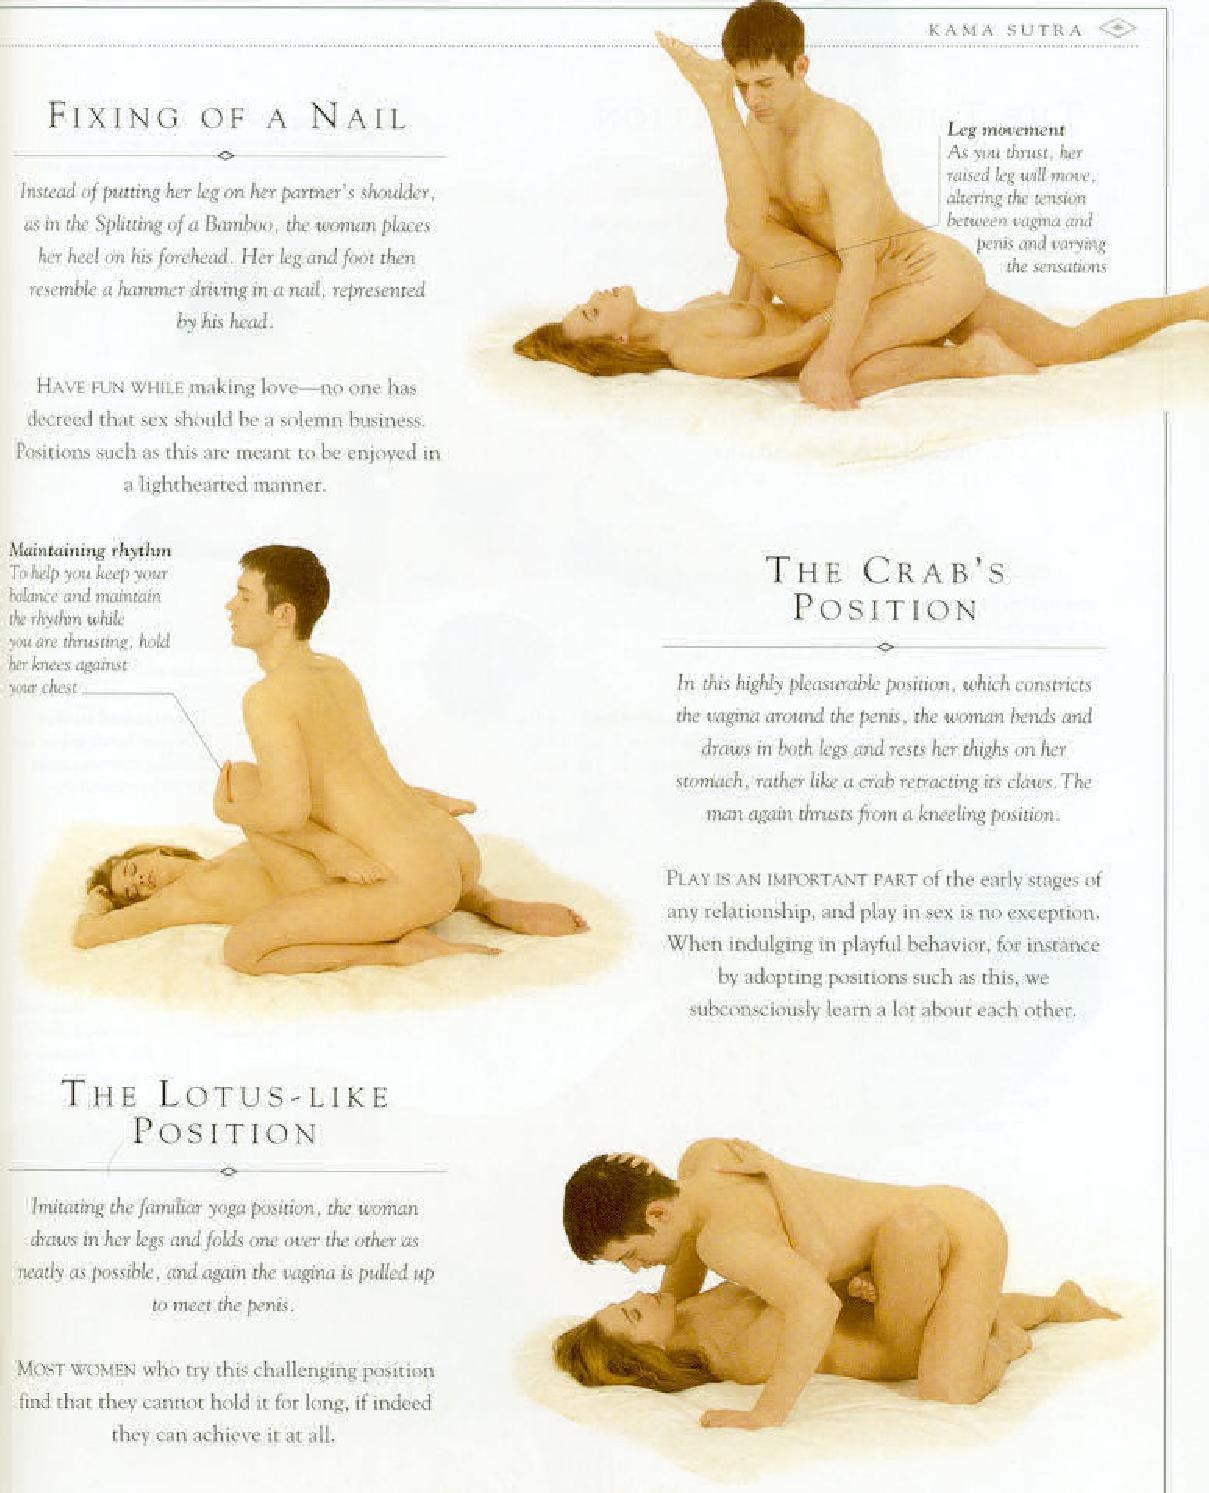 The crab sexual position